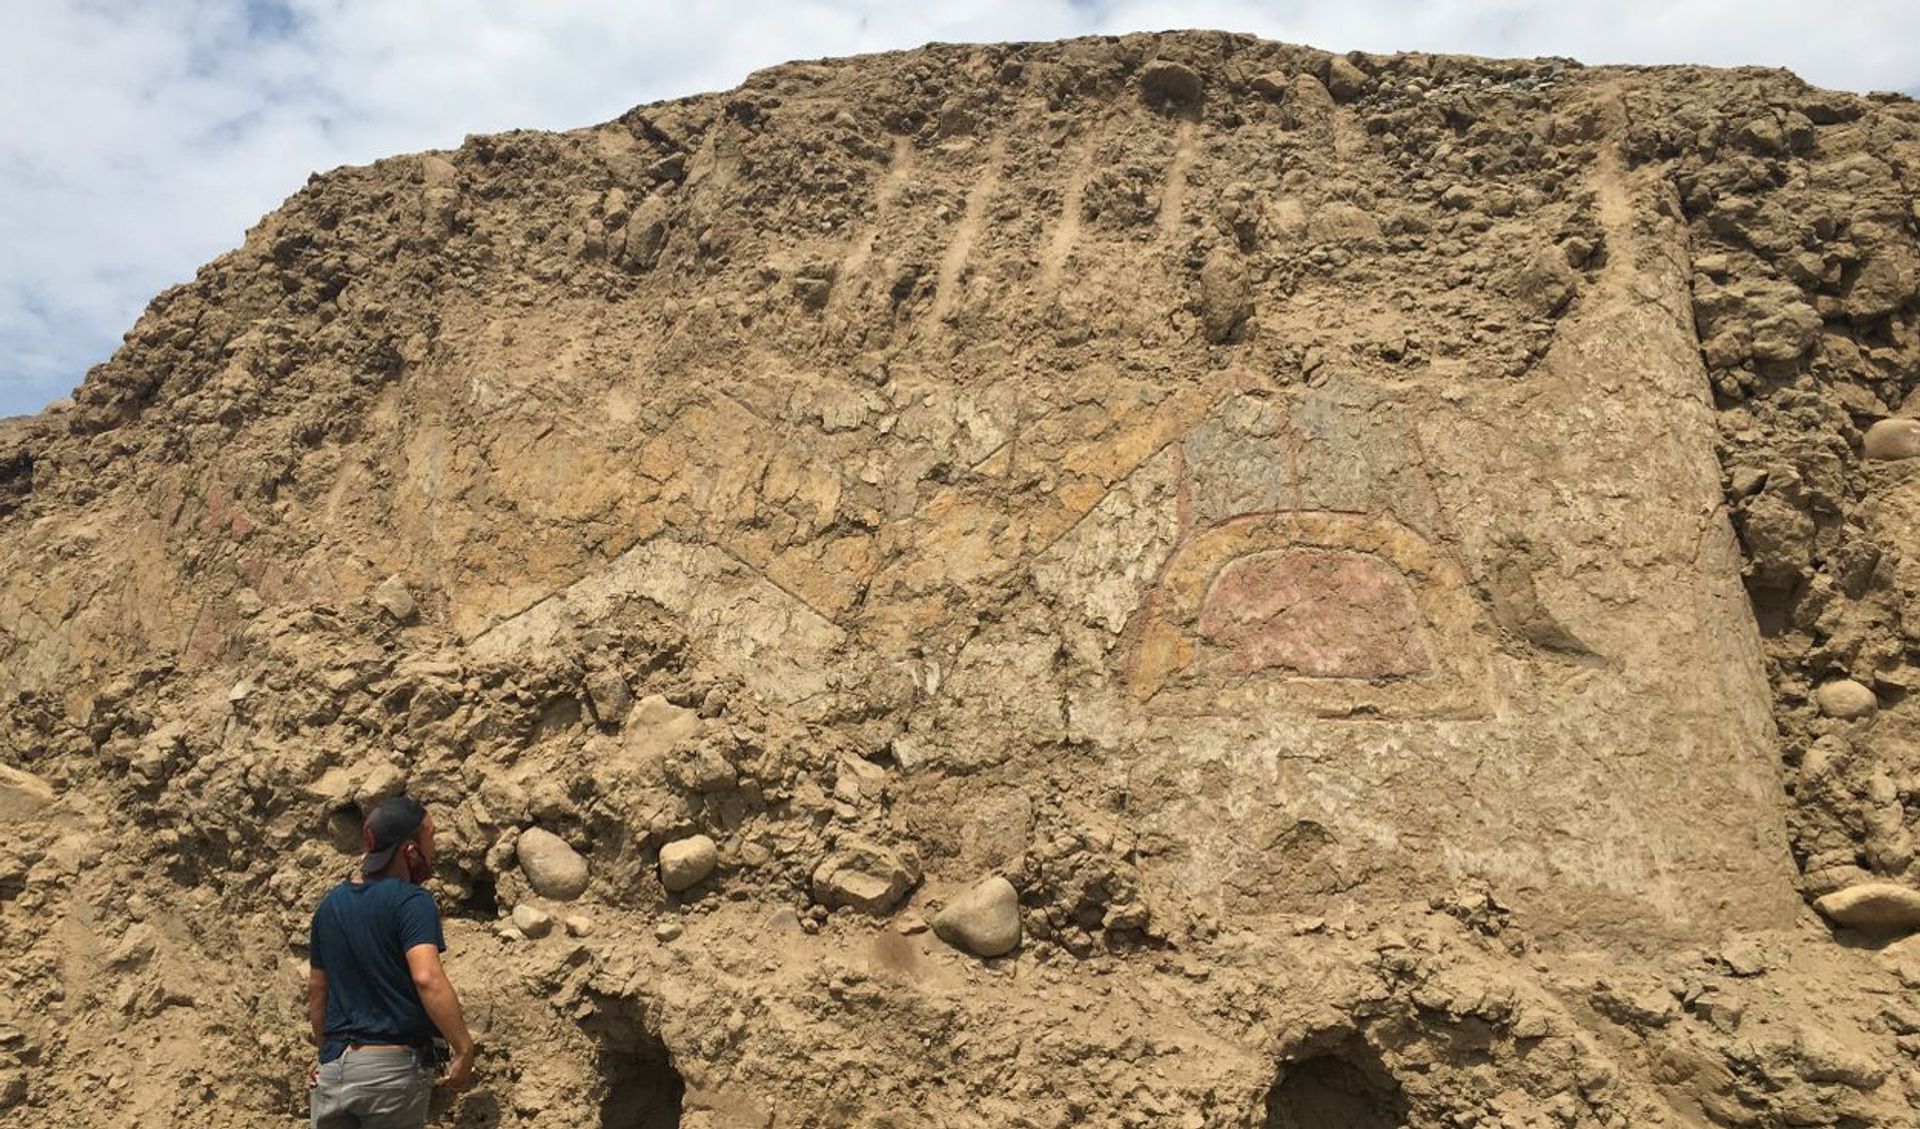 The mural was discovered on the side of an ancient adobe temple, which experts believe was built by the pre-Columbian Cupisnique people in Peru’s Virú province, roughly 300 miles north of Lima Photo: Régulo Franco Jordán